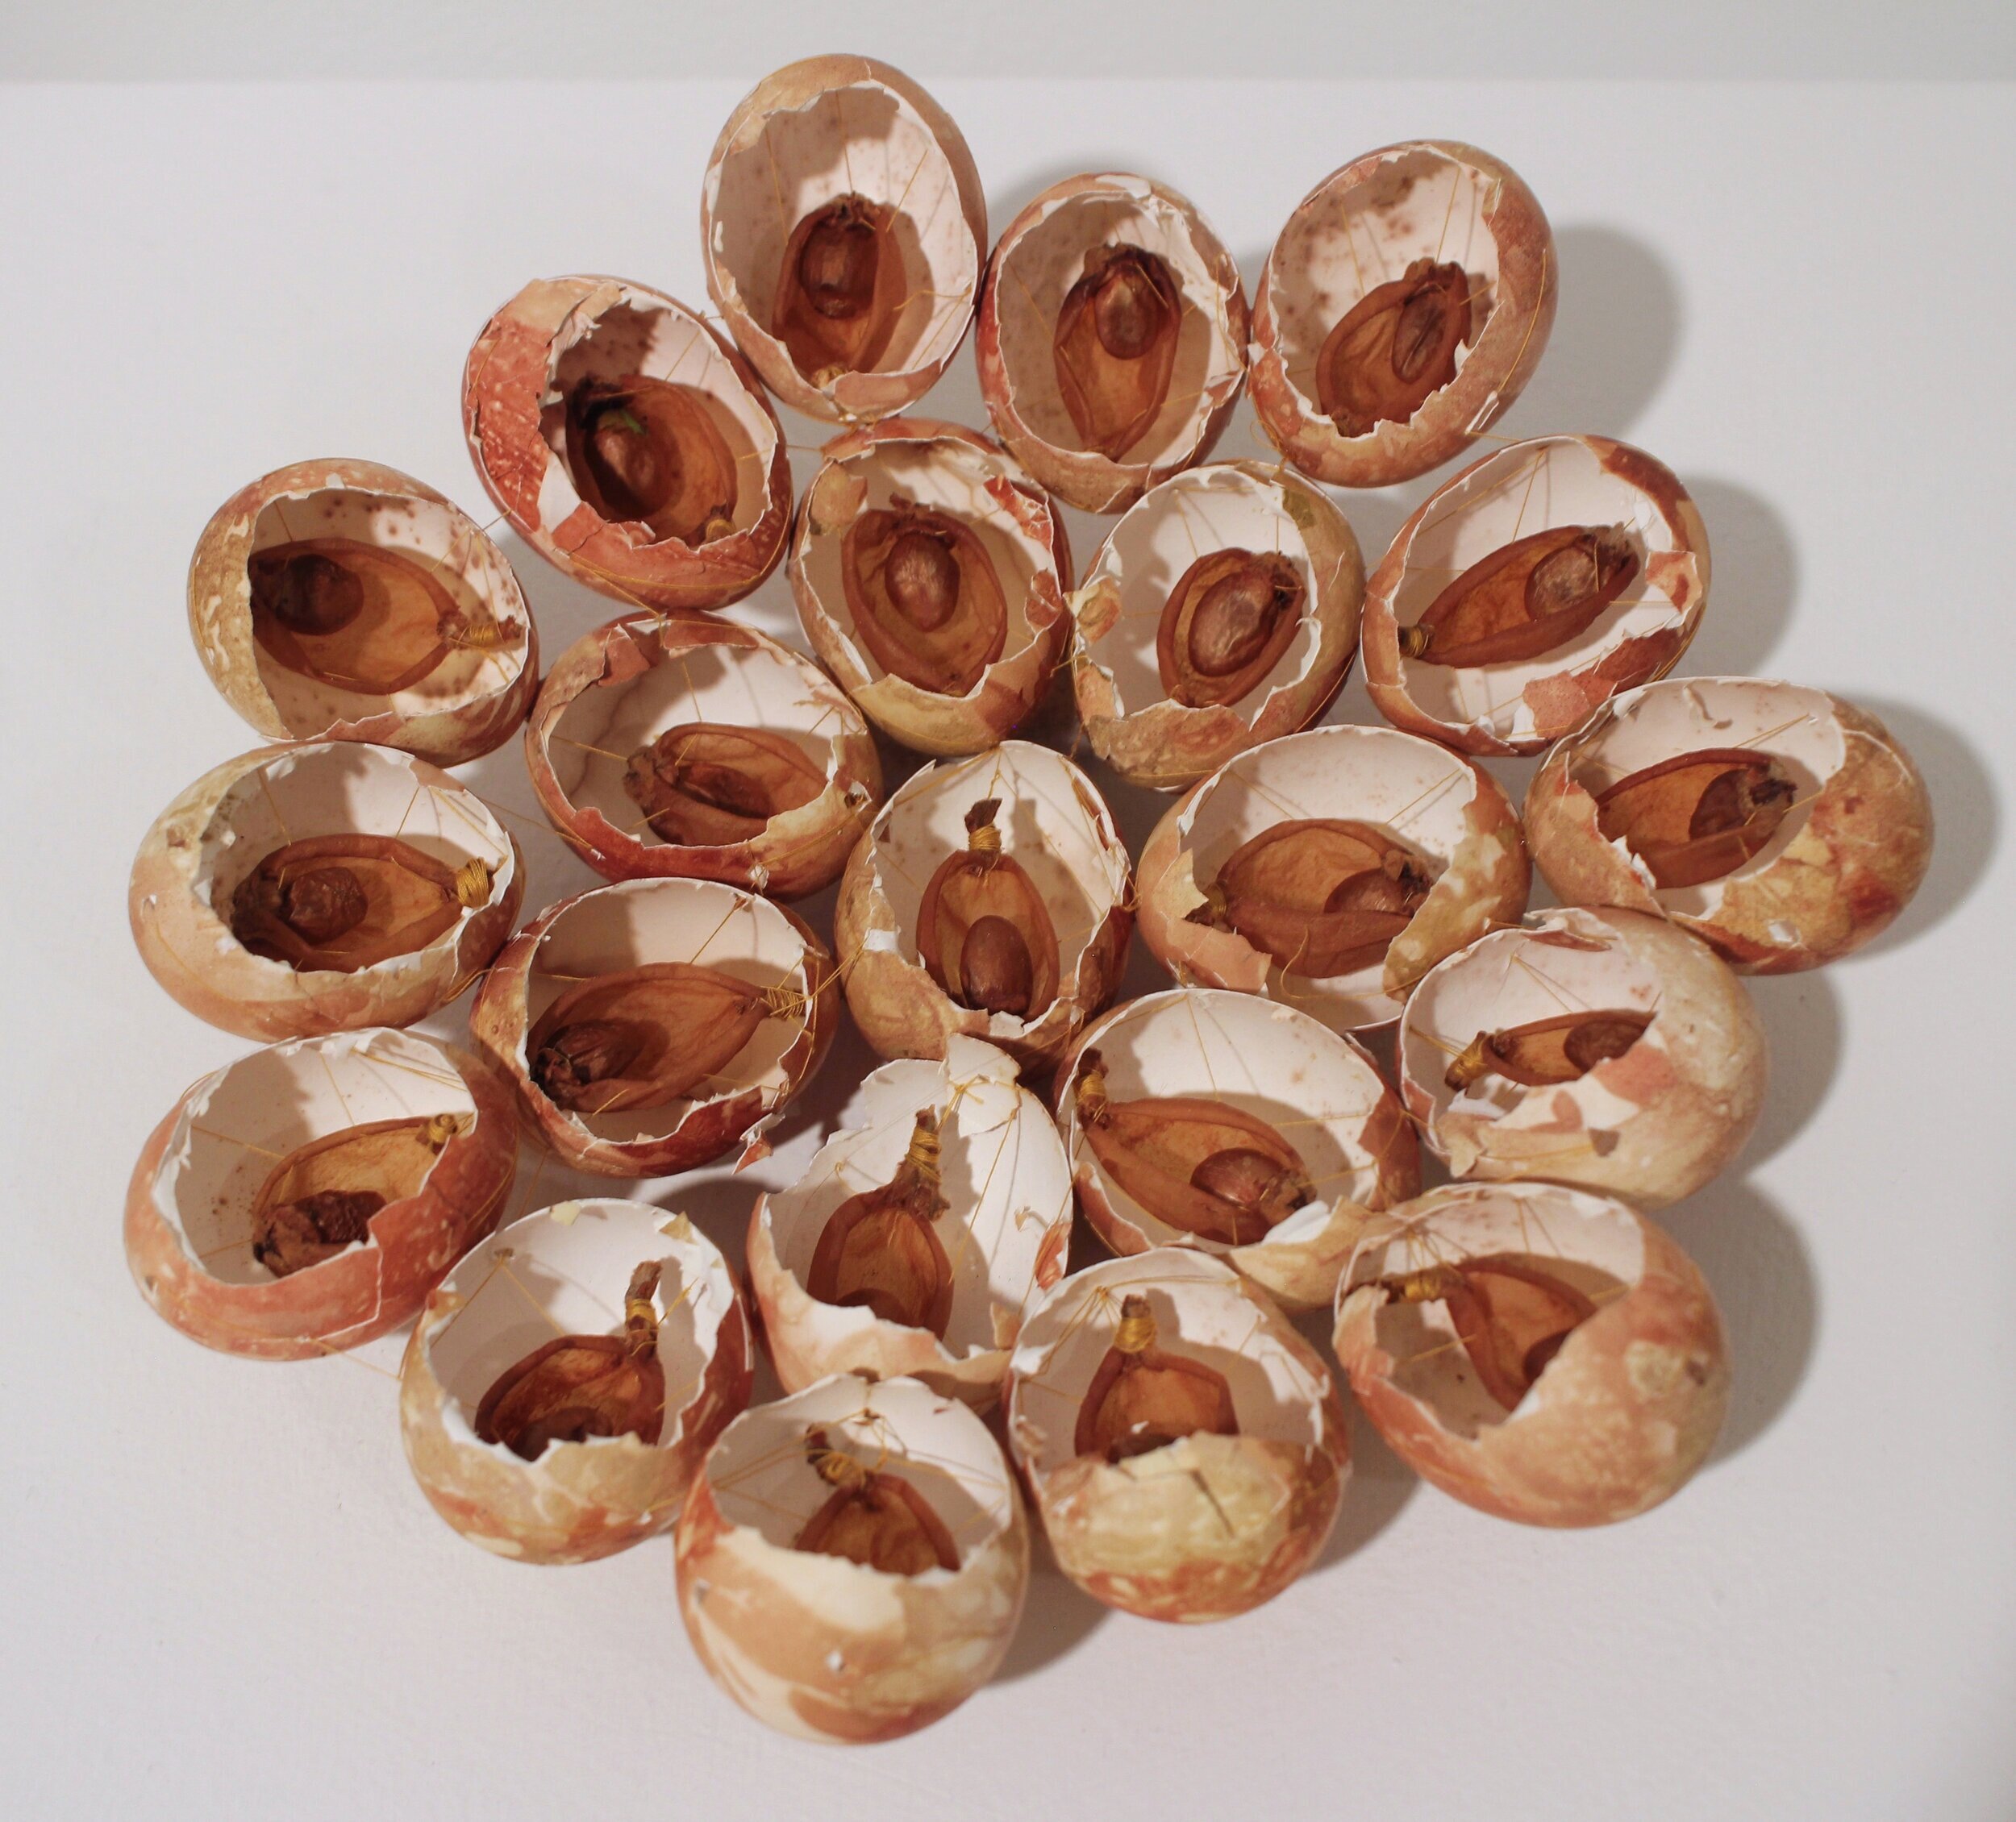    Semiyas,   2020  Bundle dyed egg shells, nispero fruit skin and seeds, thread  The nispero fruit was harvested from the tree that my grandfather planted at my childhood home. I excavated the fruit to leave just the seeds and skin to dry in the sun